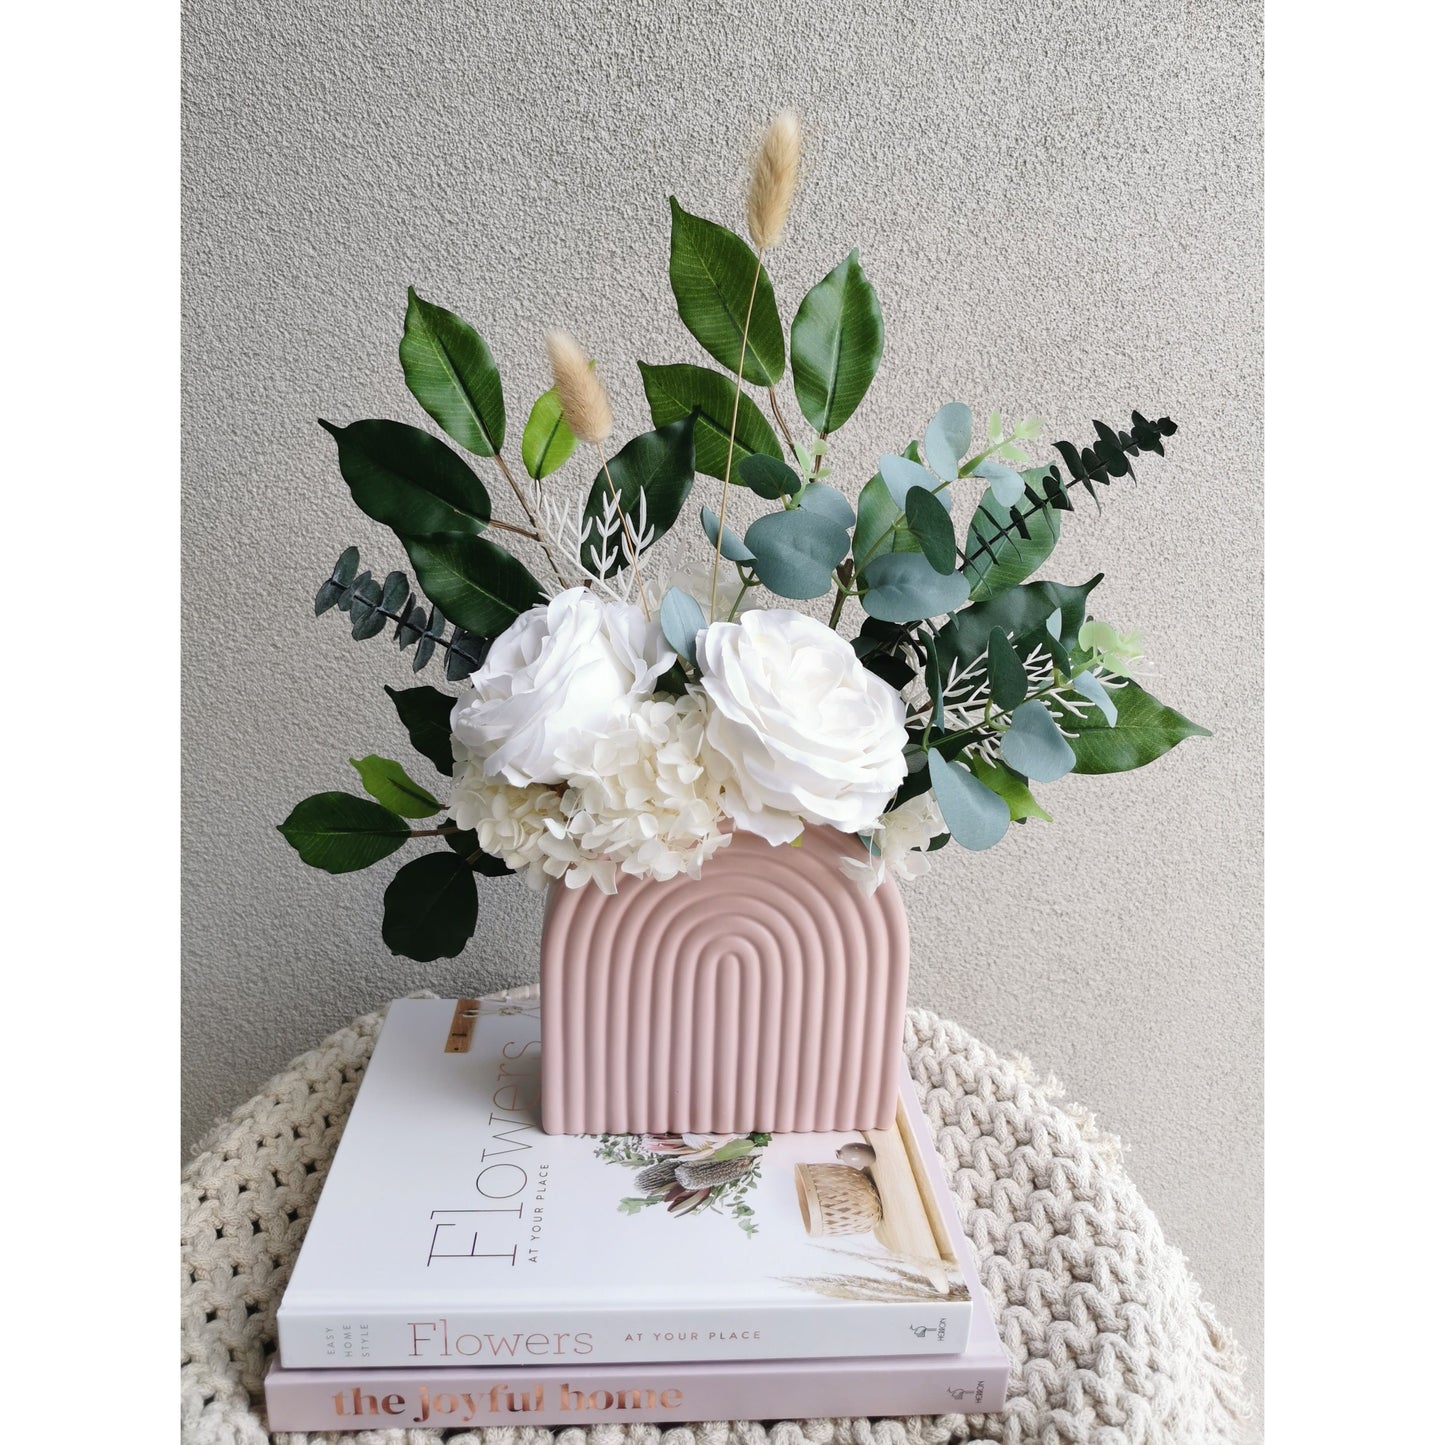 Green & white flowers consisting of dried, preserved and artificial flowers and set in to a pink arch vase. Picture shows the flower arrangement sitting on design books on a table against a blank wall with a view of the flowers from birds eye view